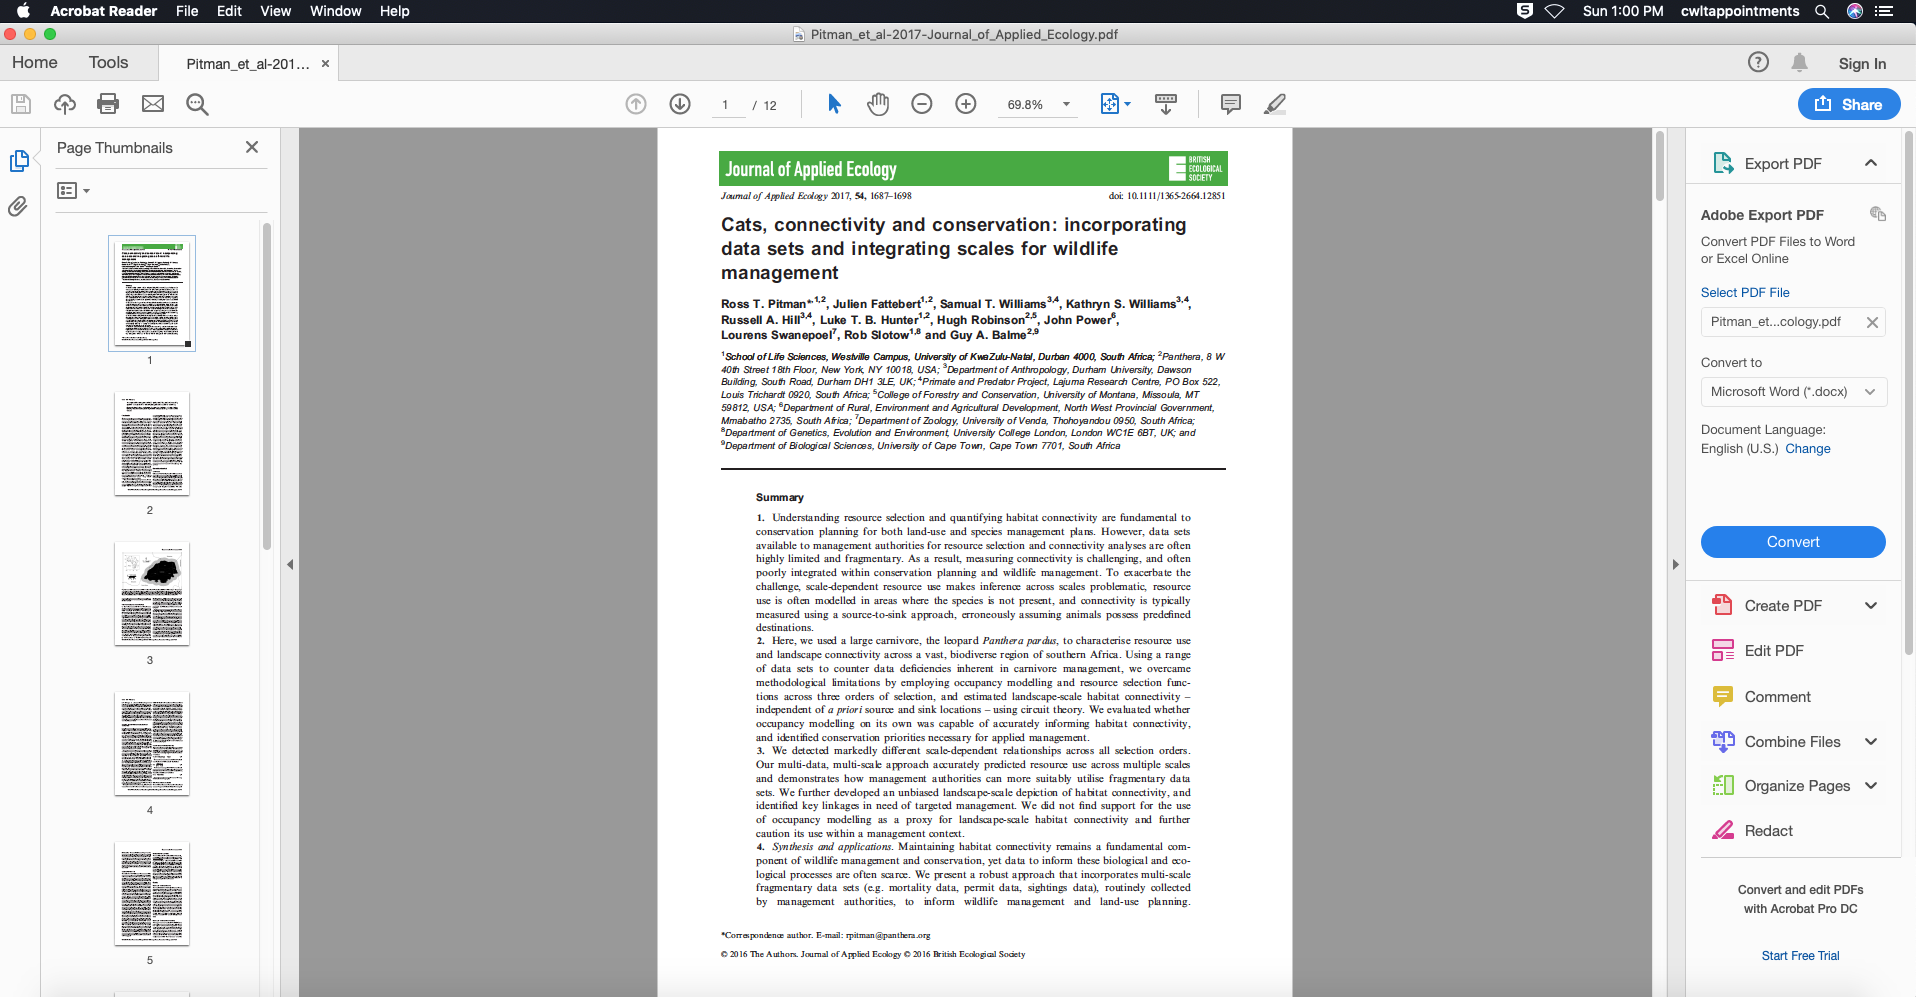 This image is a screenshot of the same article shown in the previous image, now open in Adobe Acrobat.